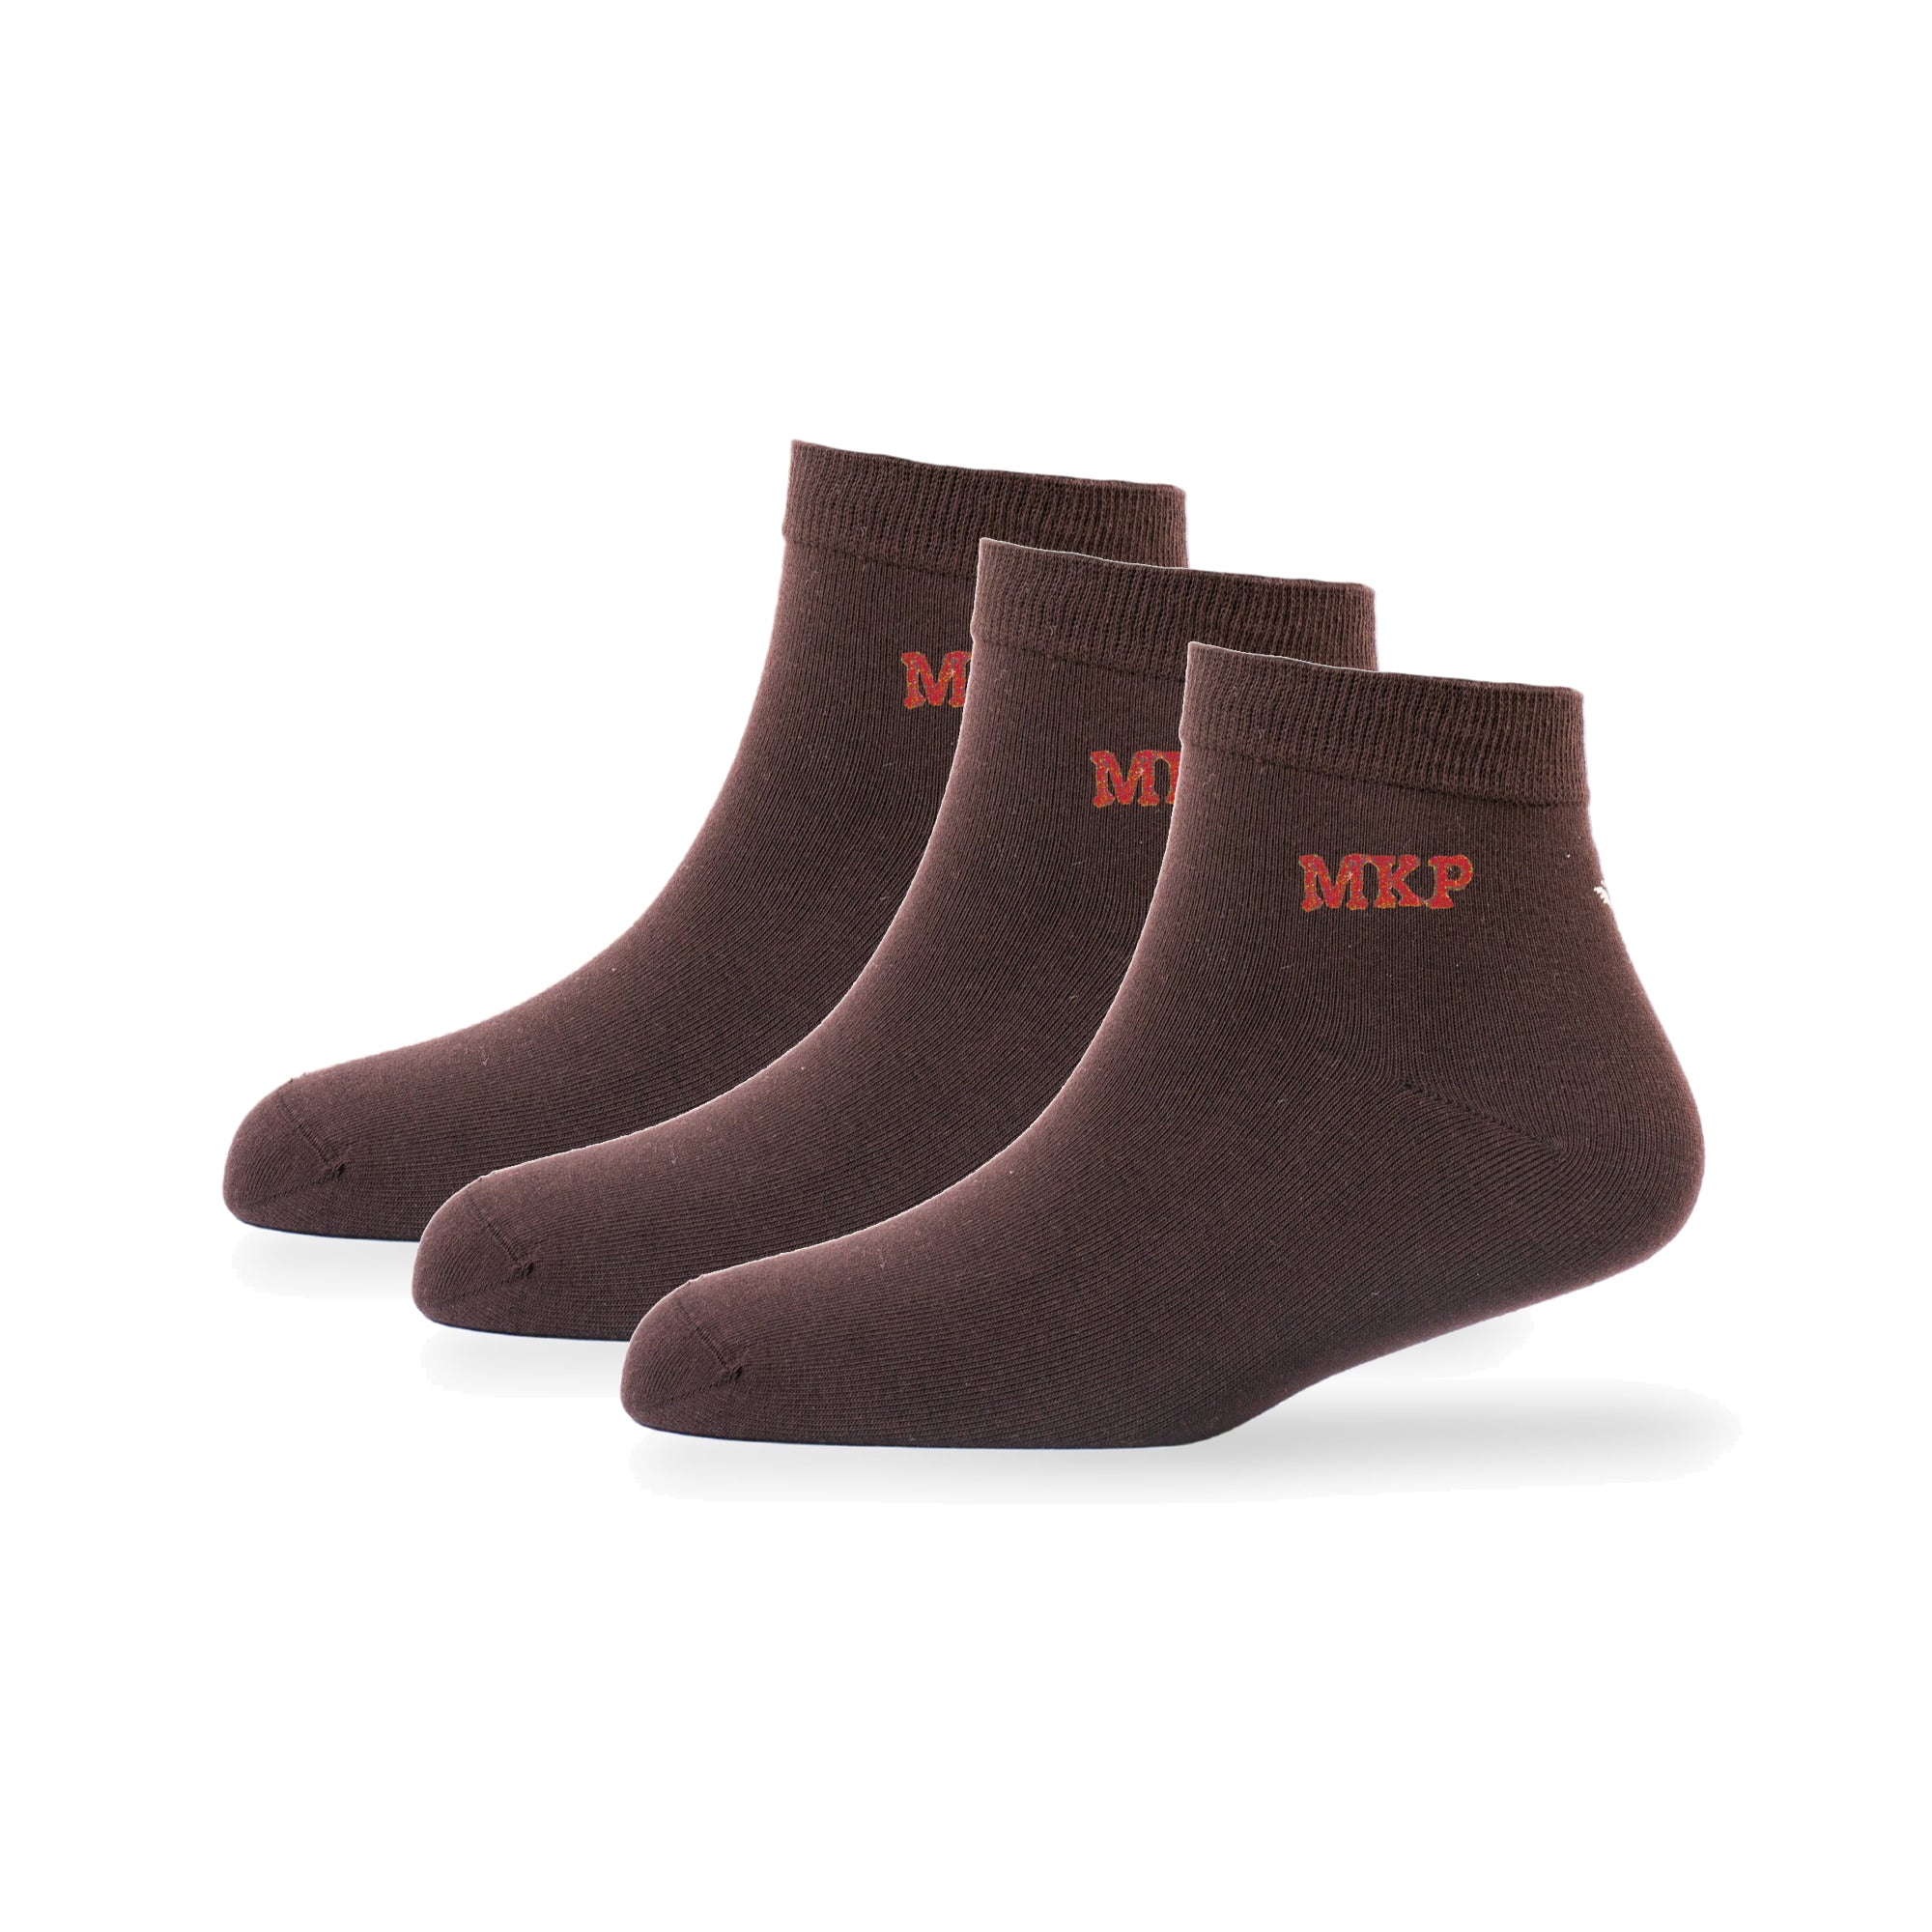 Young Wings Men's Monogram Ankle Length Socks, Colour Brown - Pack of 3 Pairs, Style no. 2595-M3